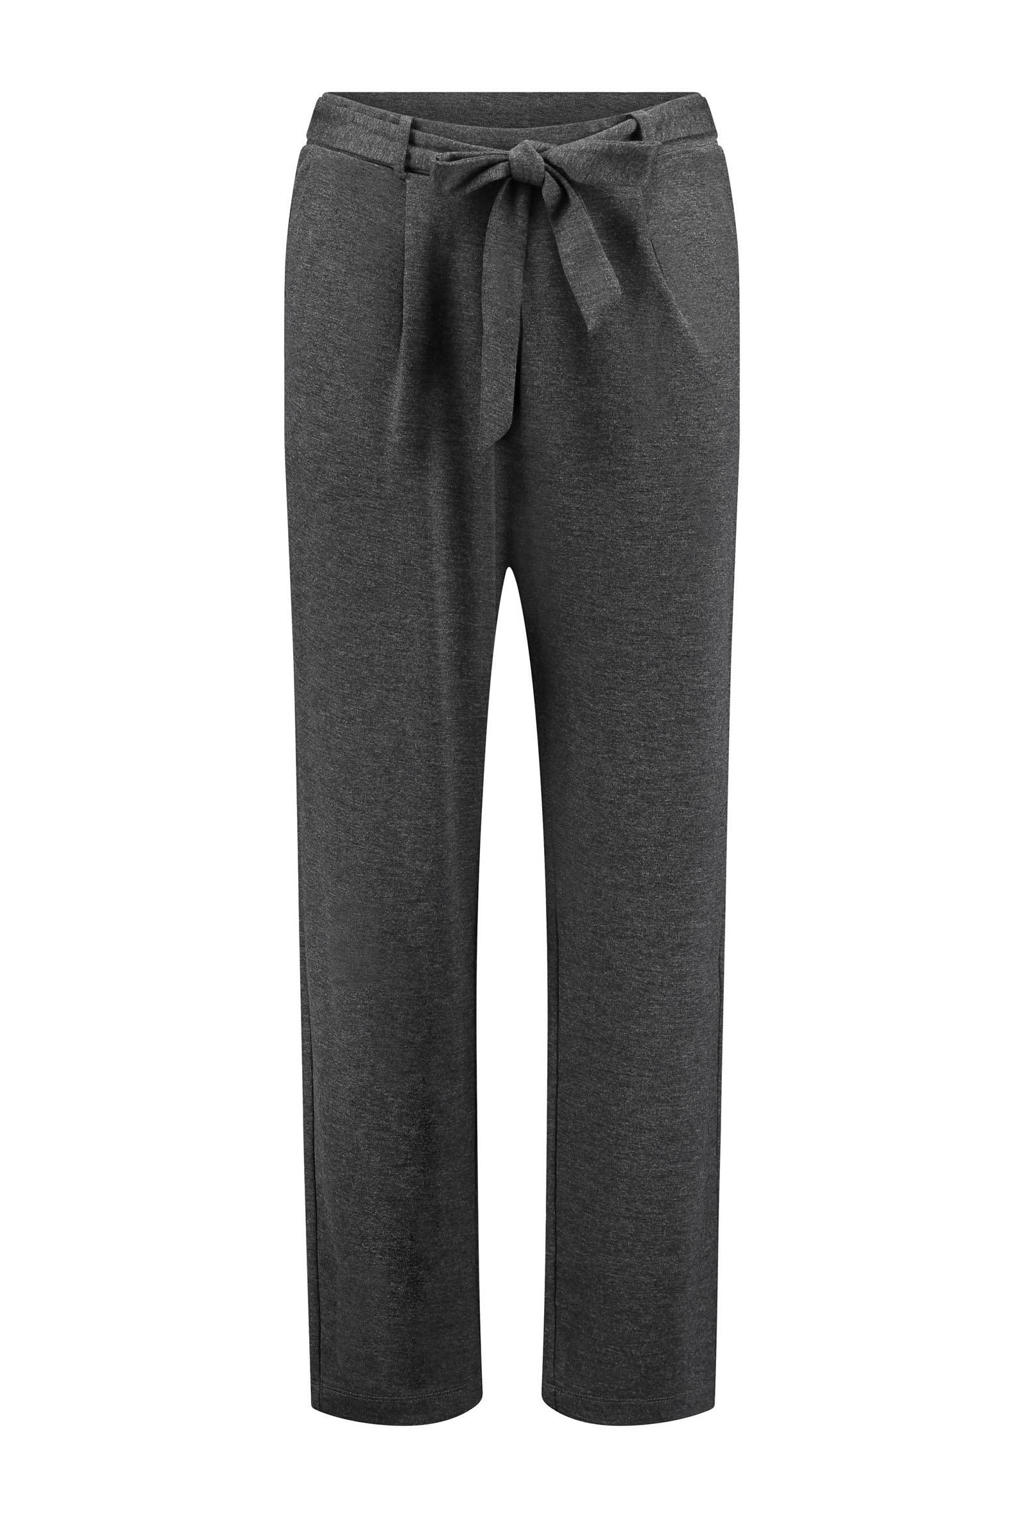 expresso travel jersey jogger